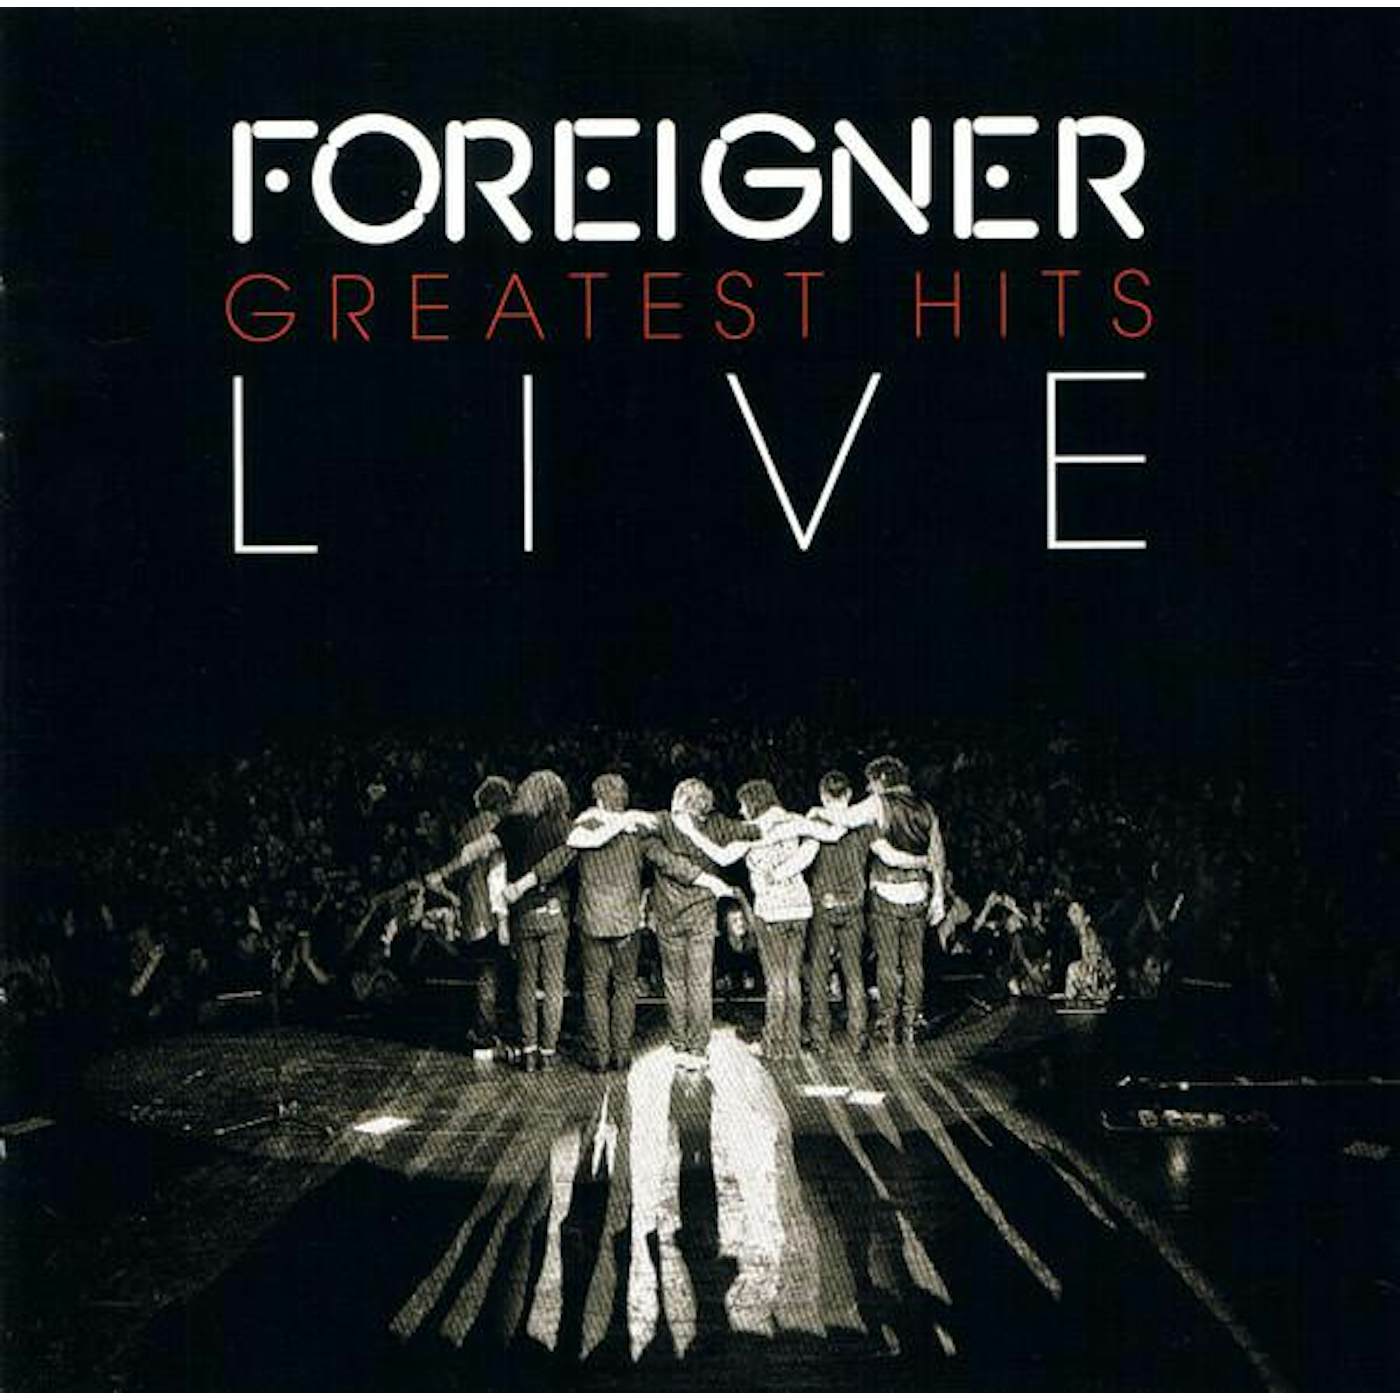 Foreigner GREATEST HITS LIVE CD